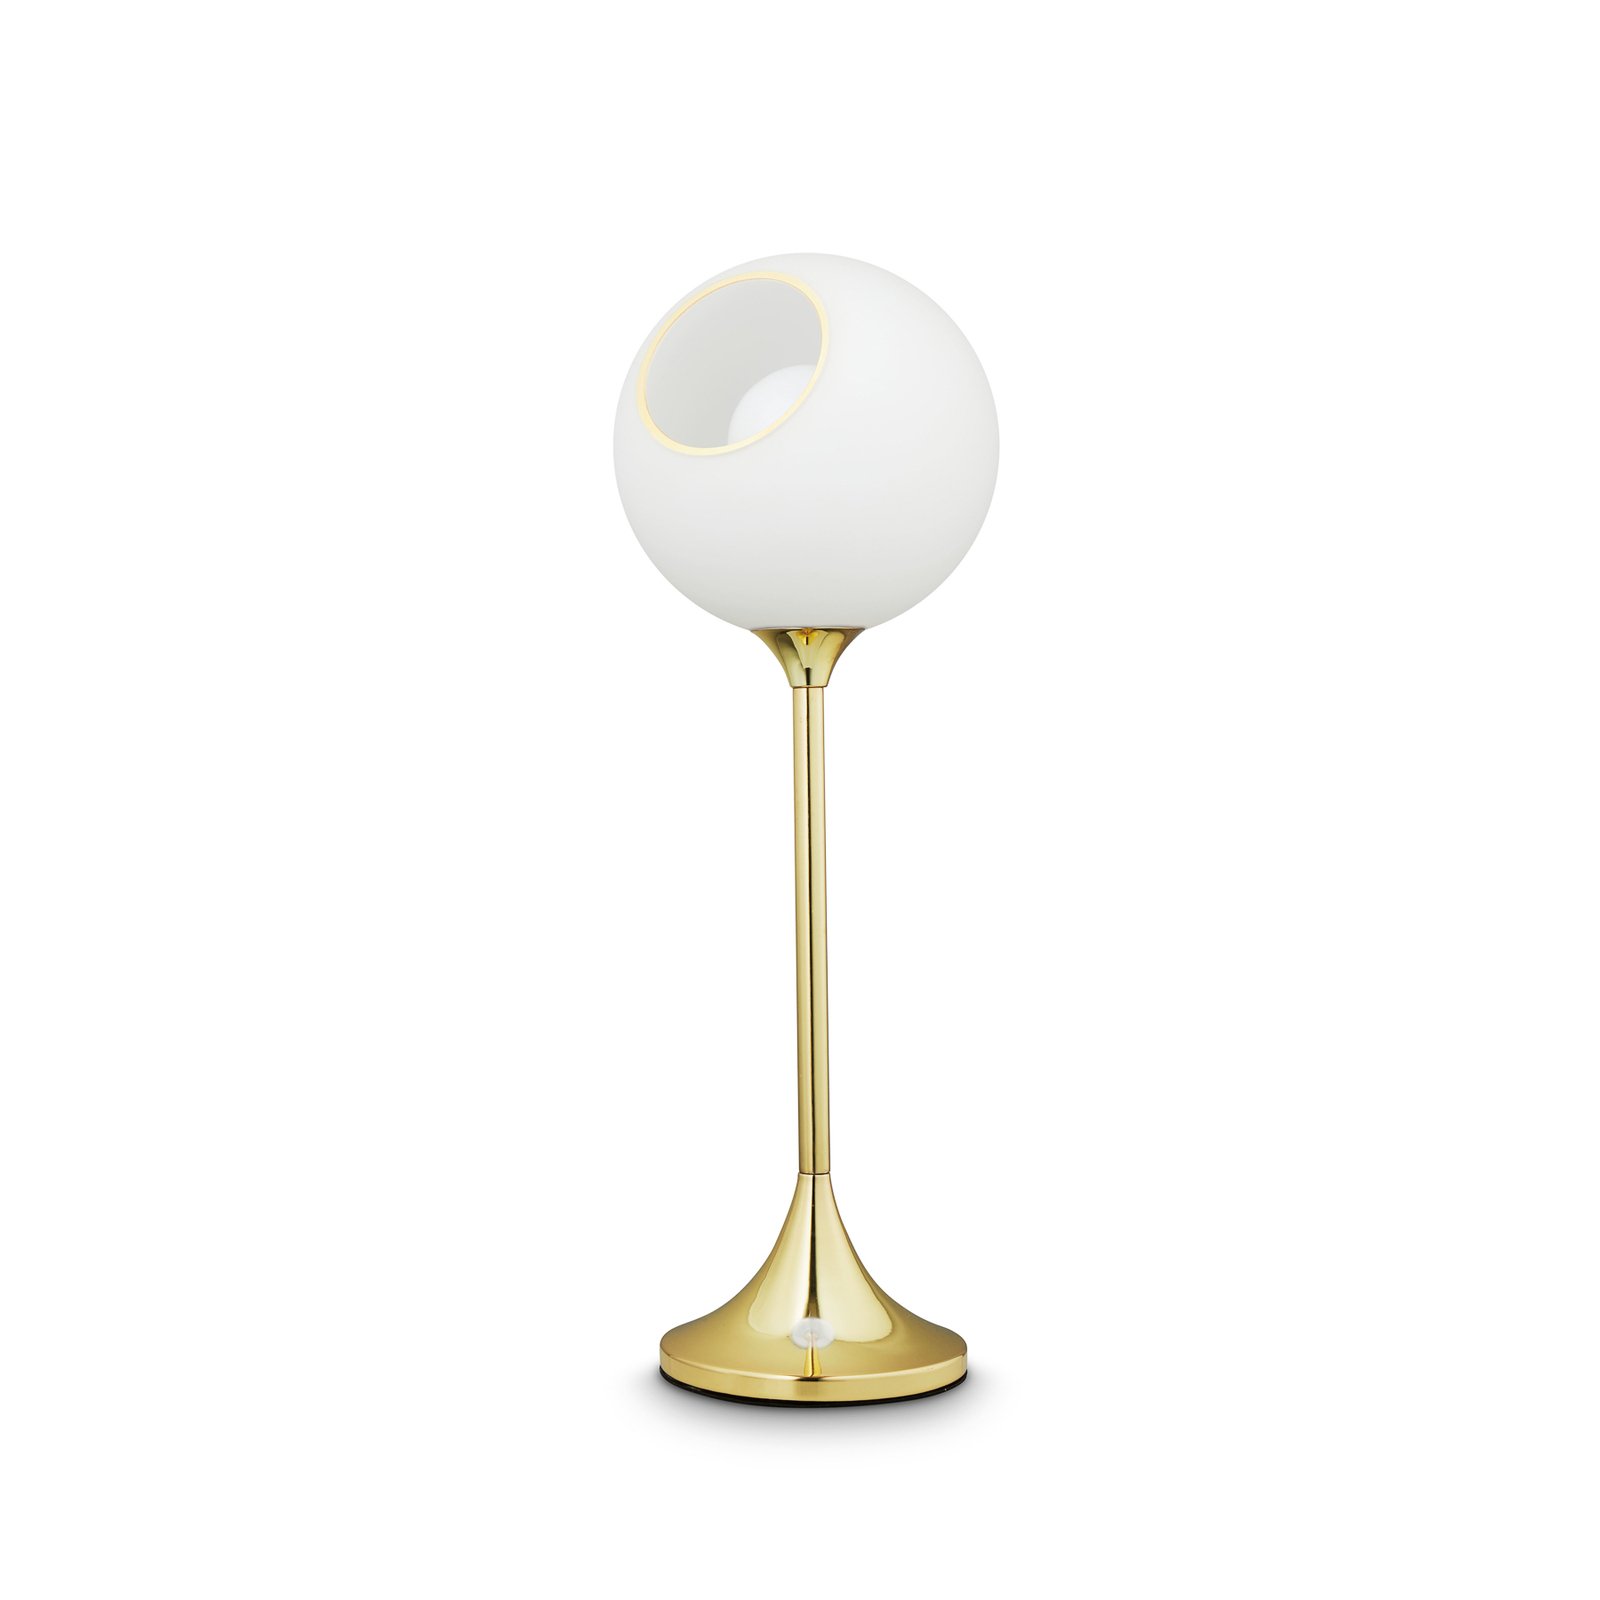 Ballroom table lamp, white, glass, hand-blown, dimmable